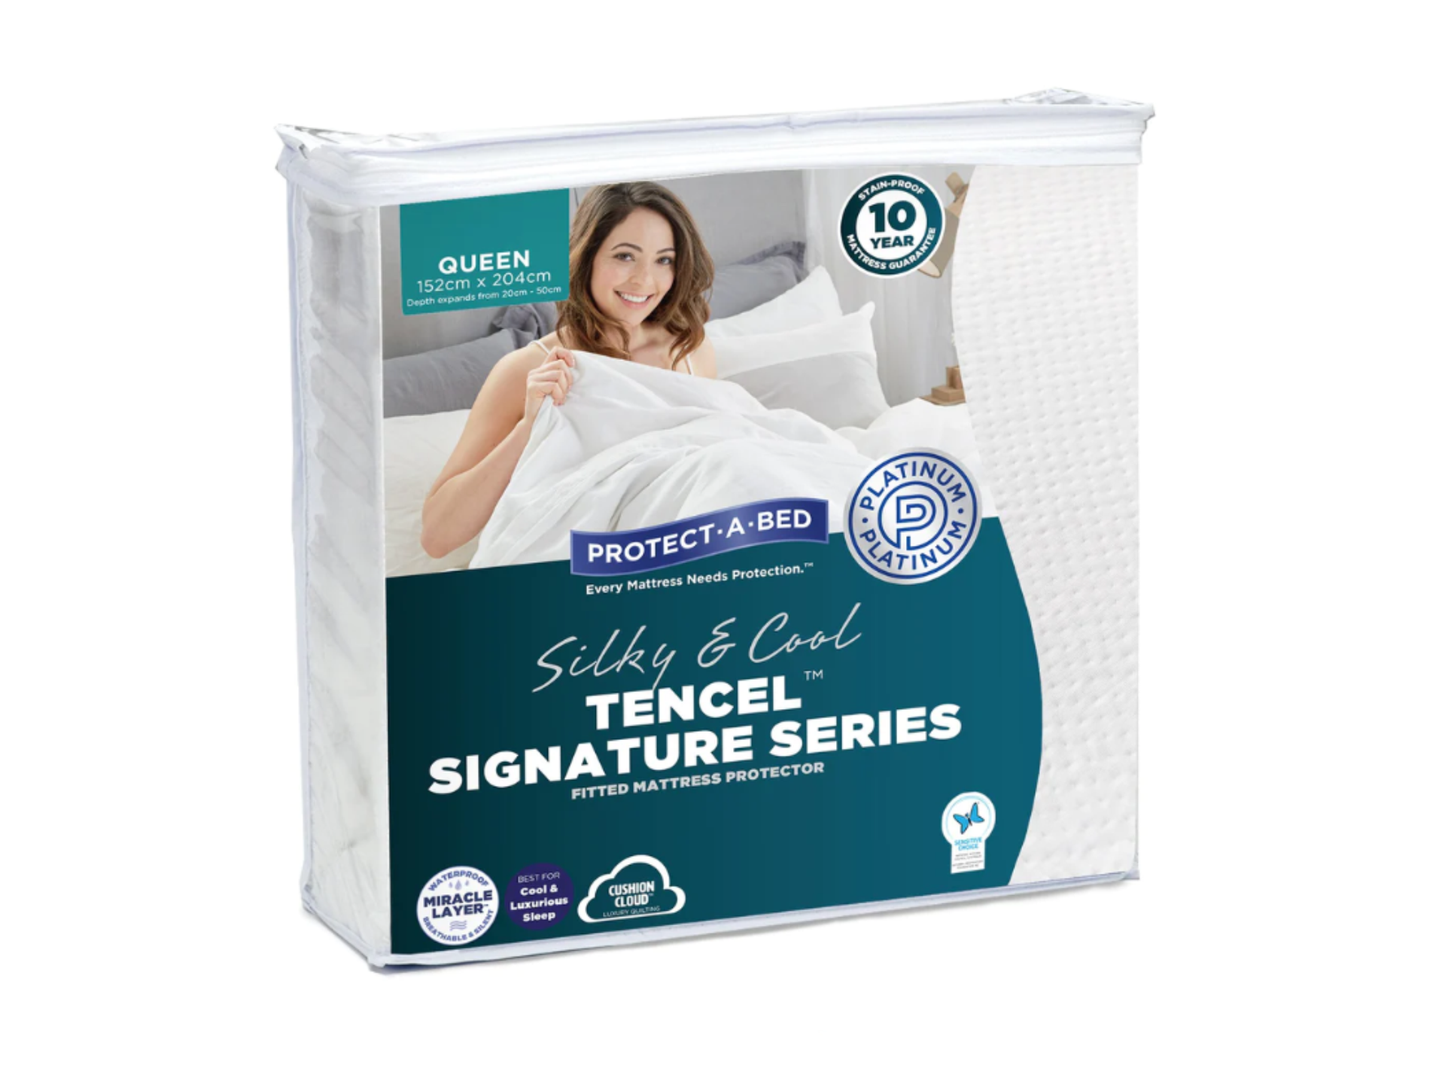 Protect-A-Bed Bundle featuring Tencel® Signature Series Long Double